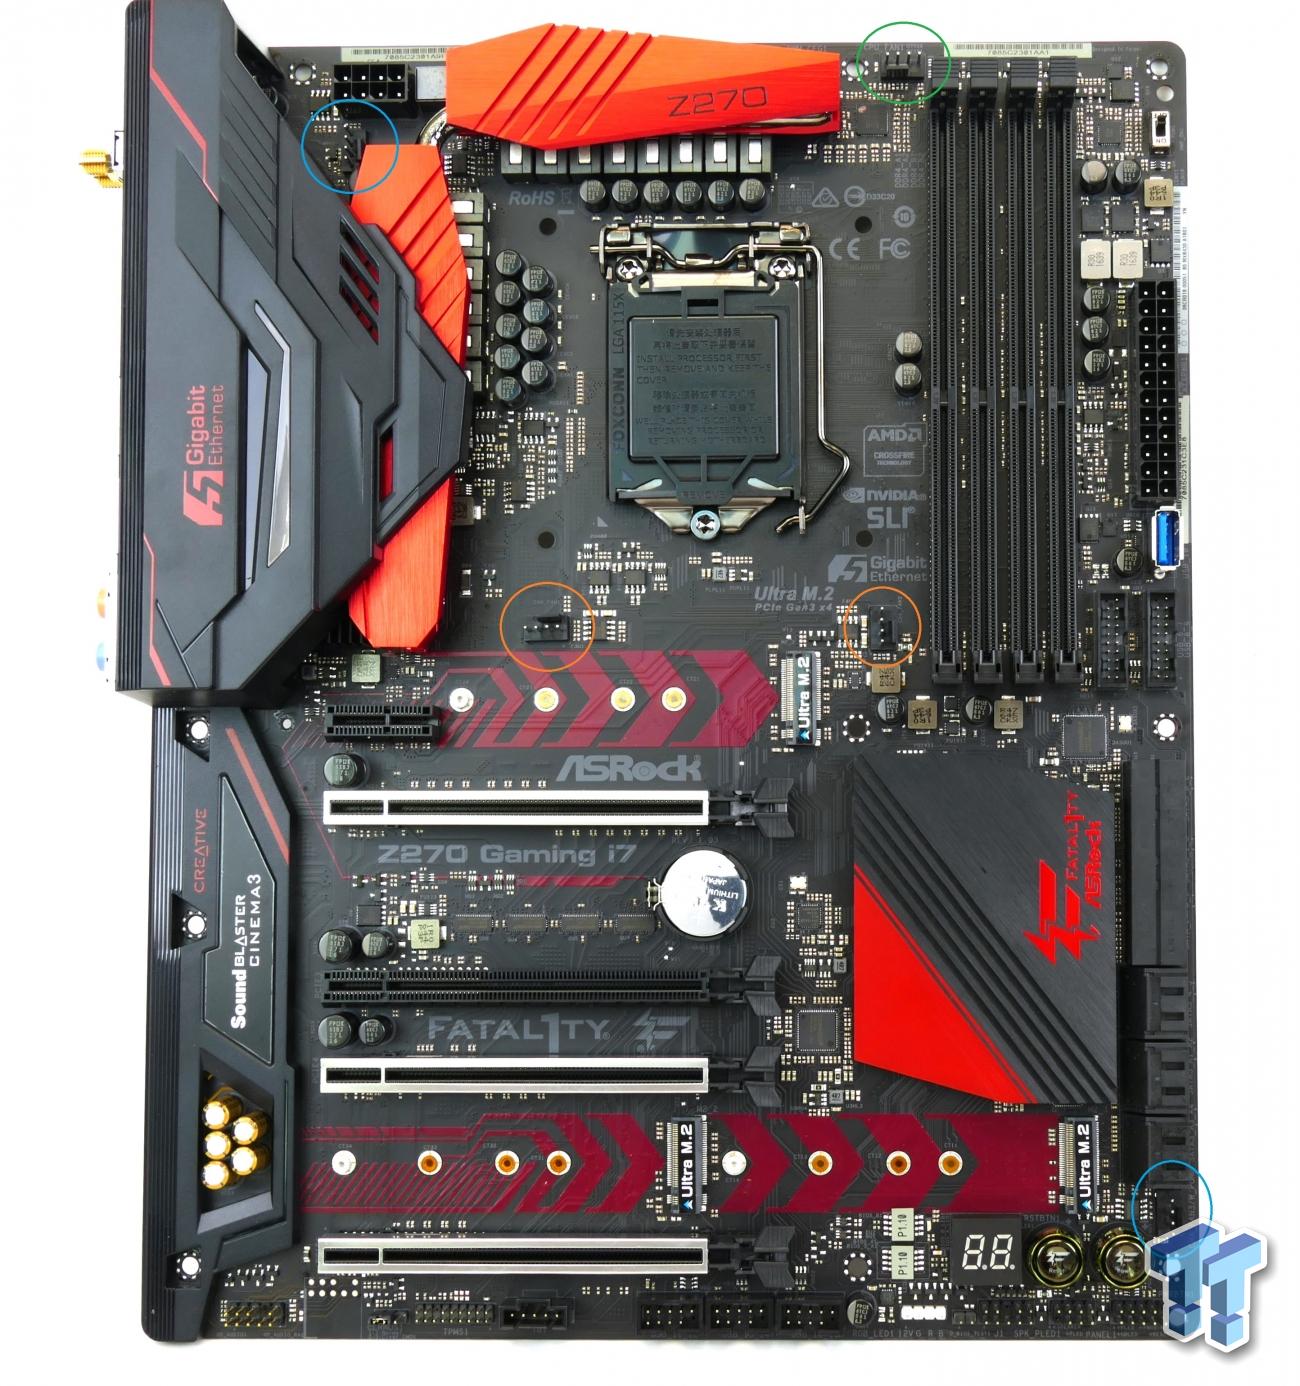 ASRock Fatal1ty Z270 Gaming i7 Motherboard Review